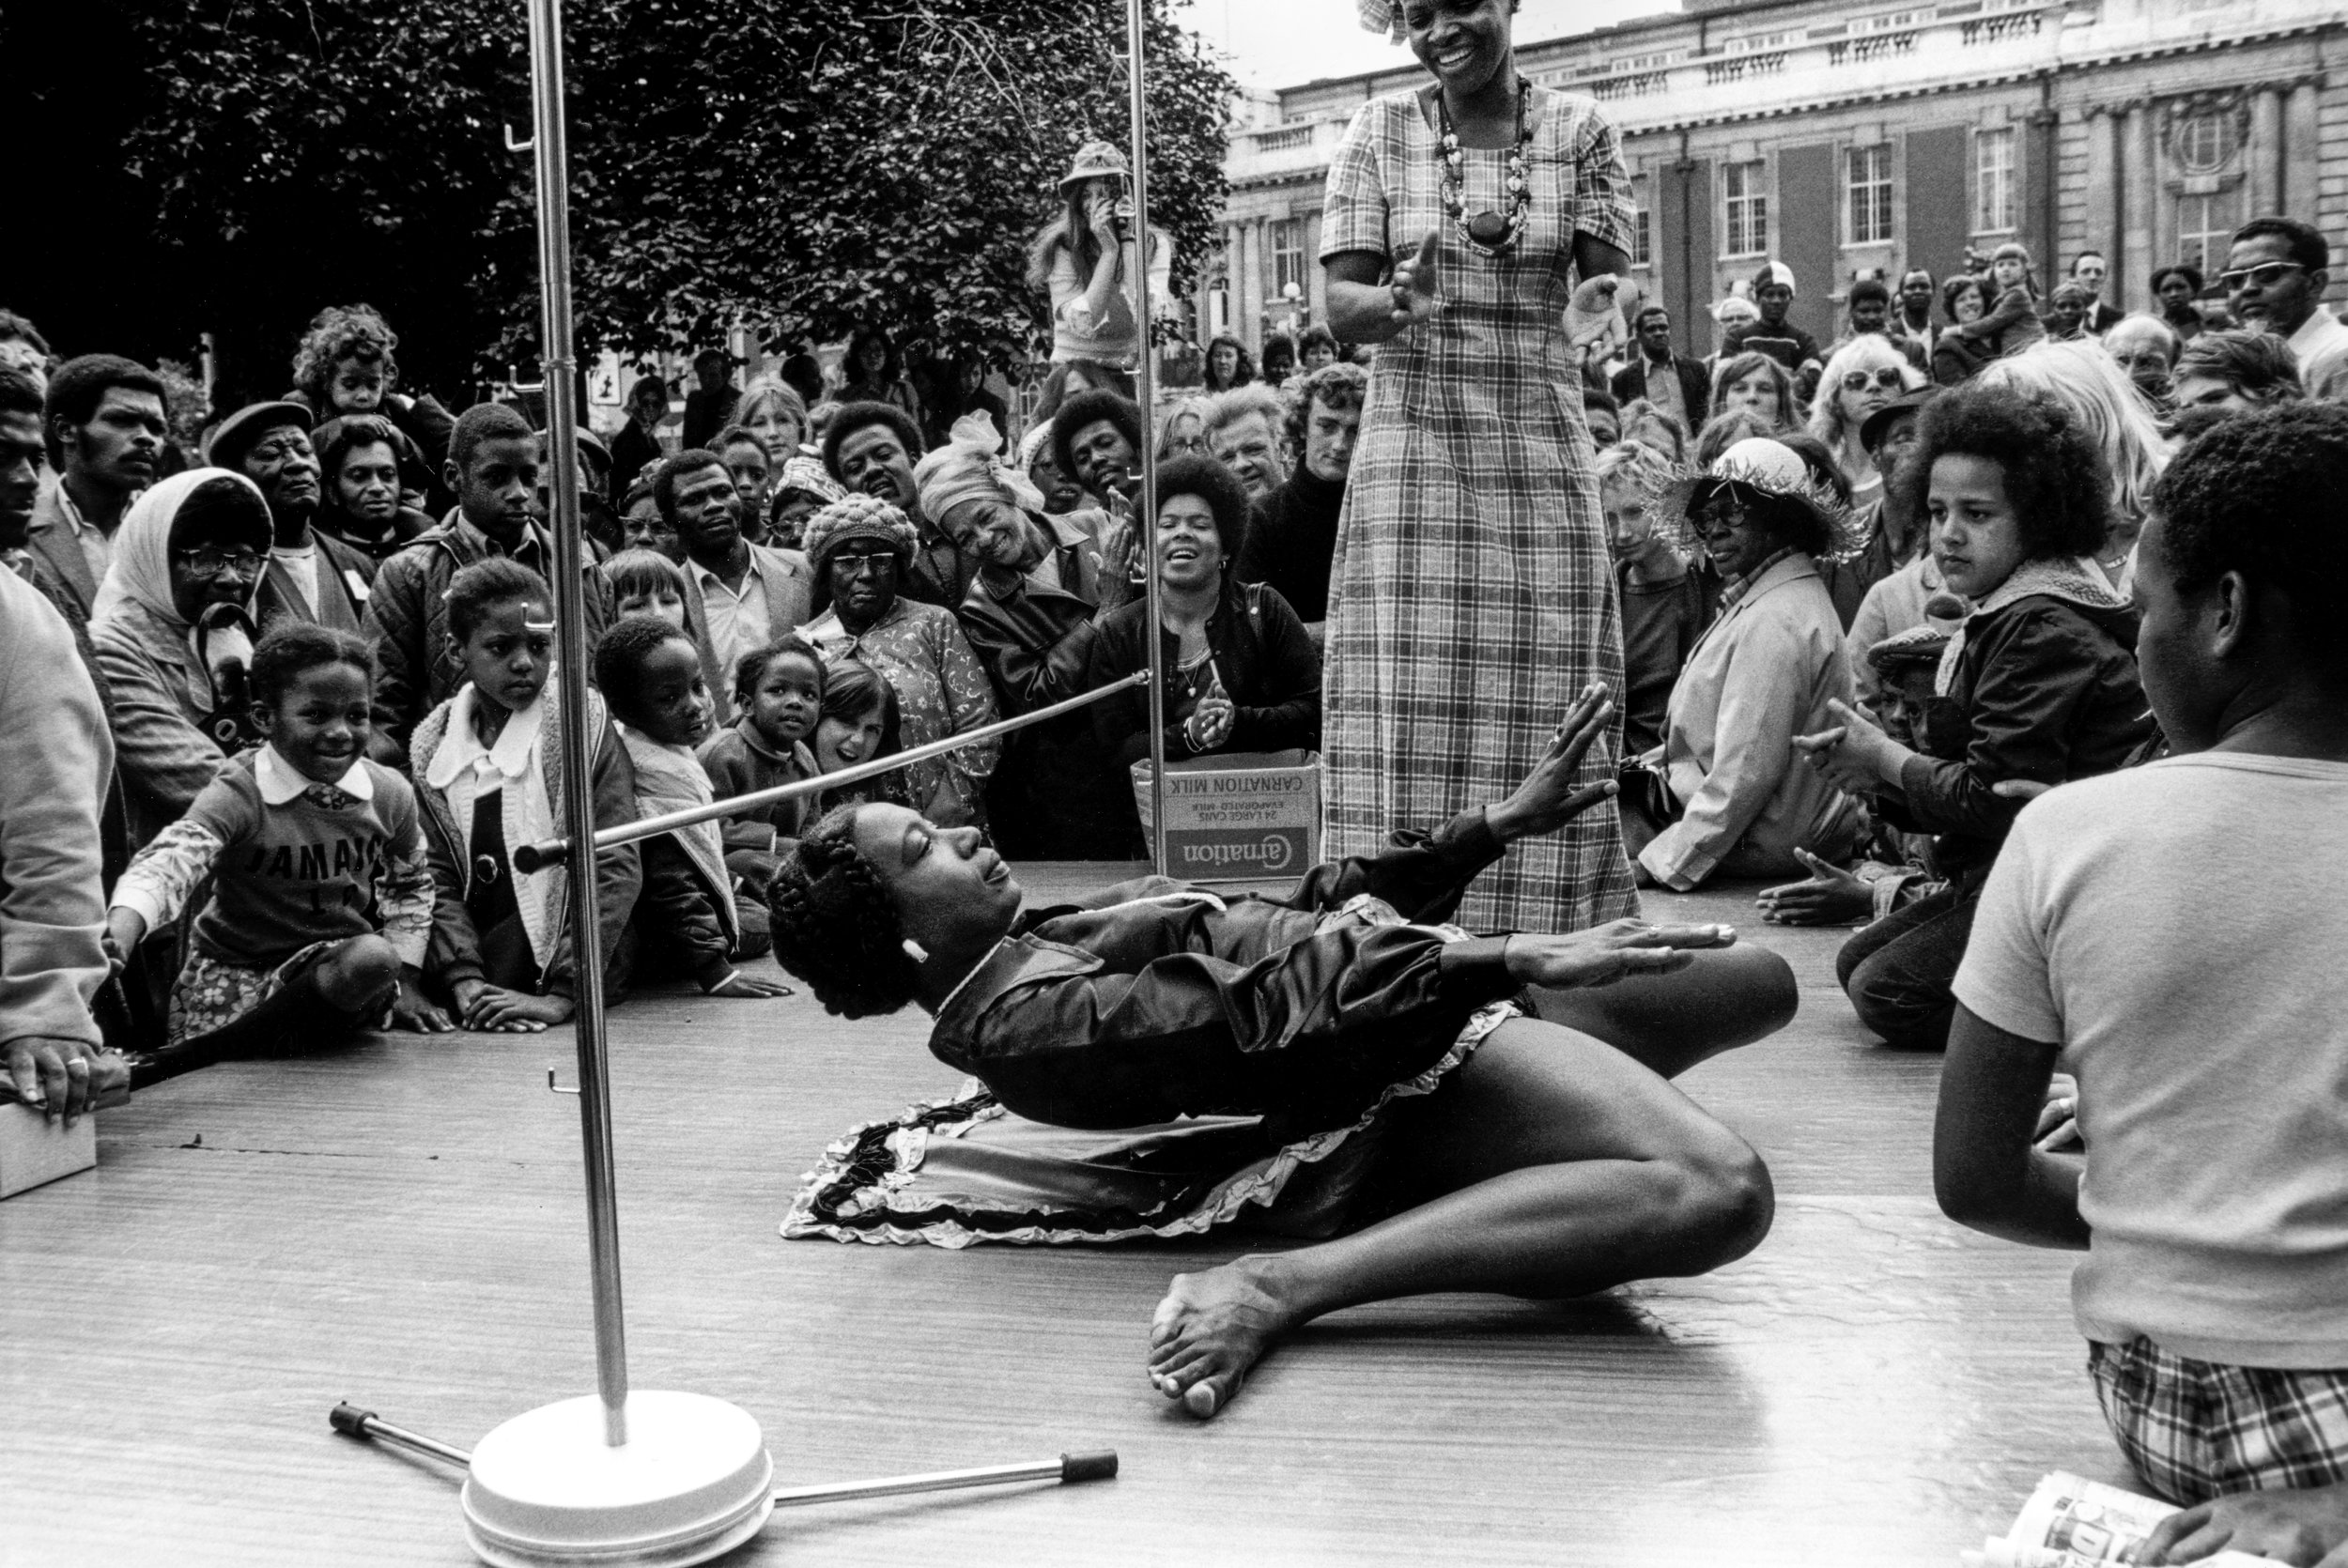 Limbo competition at Brixton festival, 1974